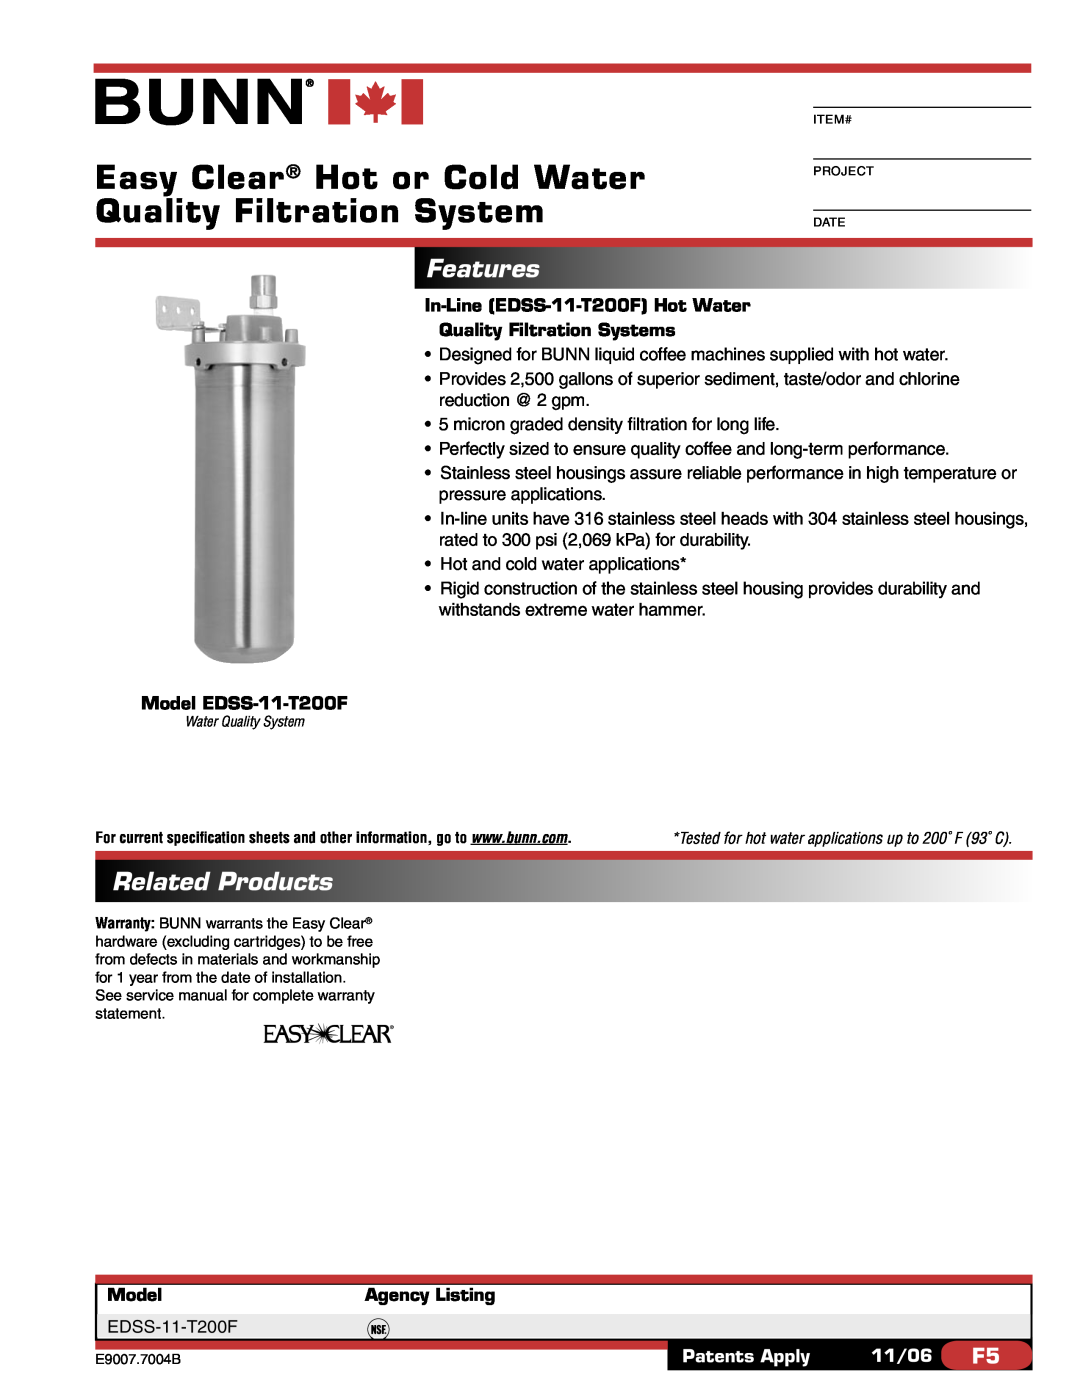 Bunn specifications Features, Related Products, In-Line EDSS-11-T200F Hot Water Quality Filtration Systems, Model 